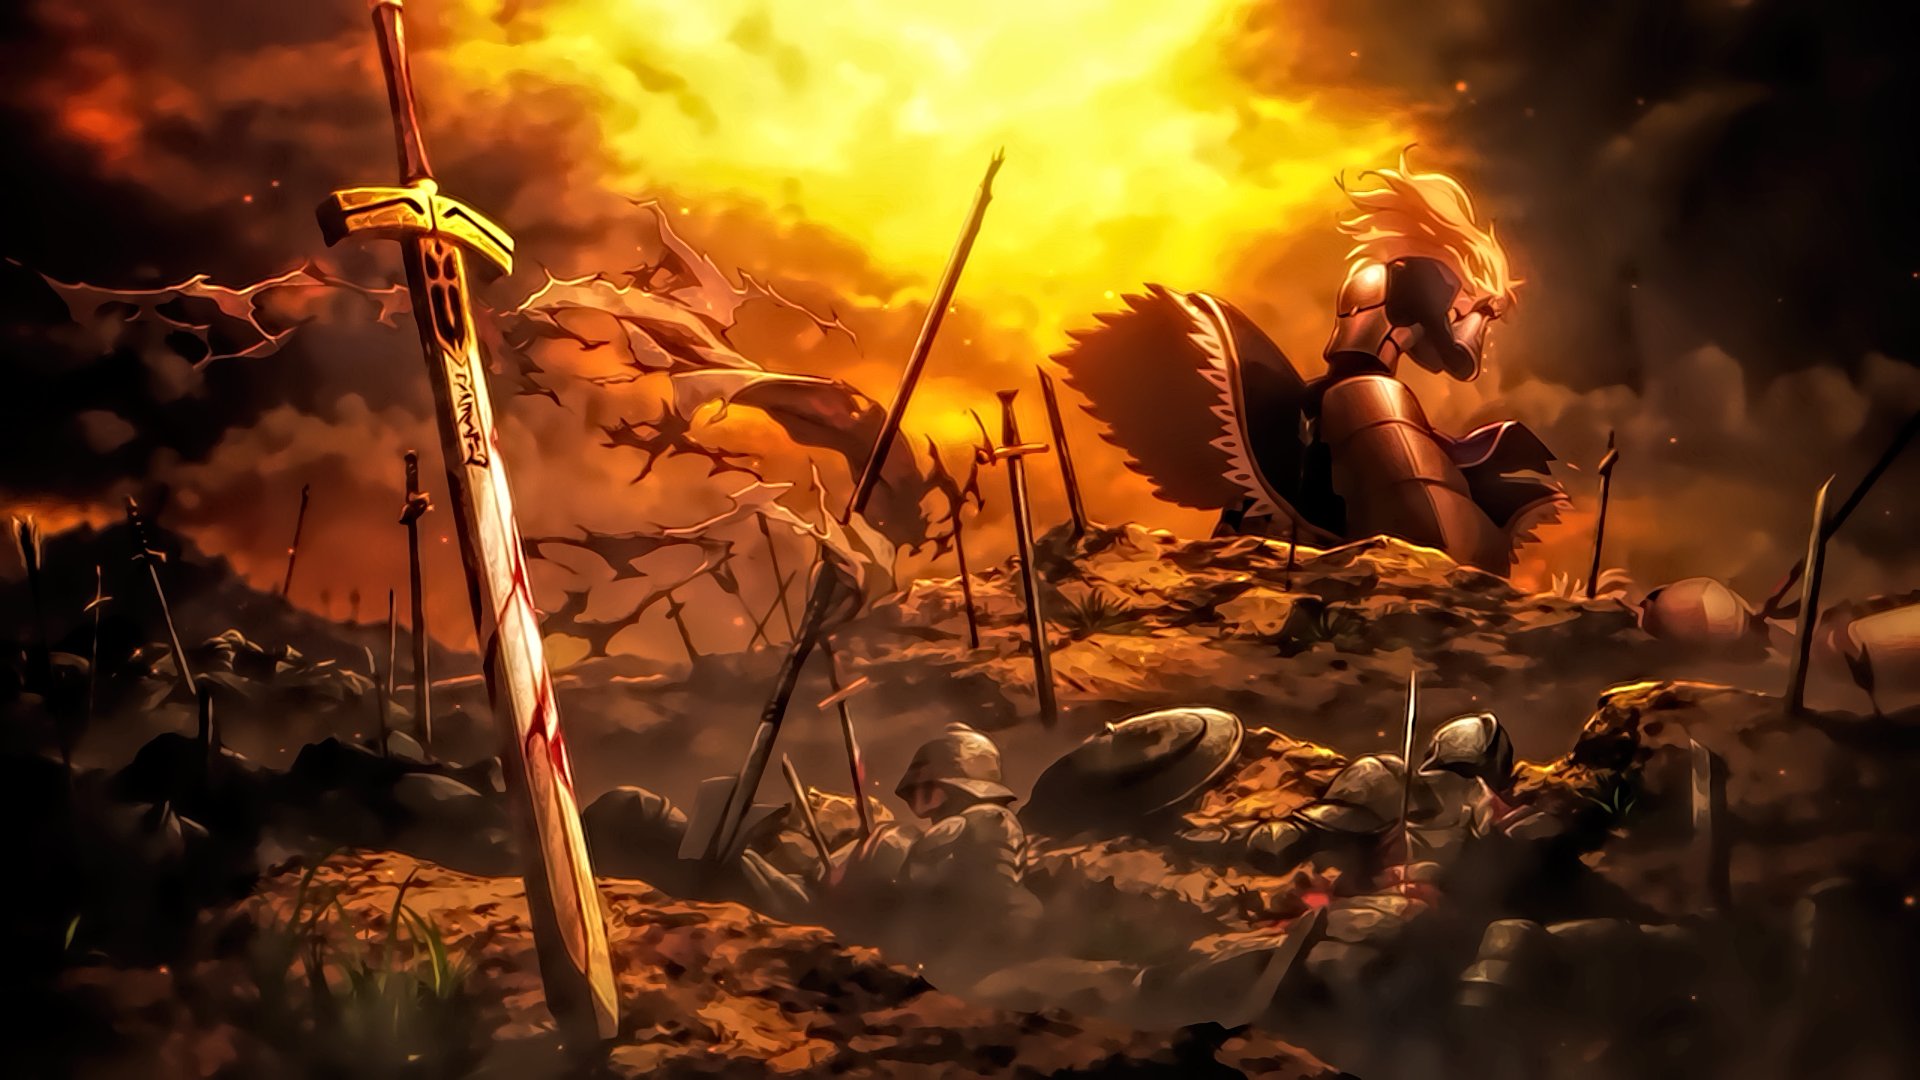 saber, Fate, Stay, Night, Unlimited, Blade, Works, Anime Wallpaper